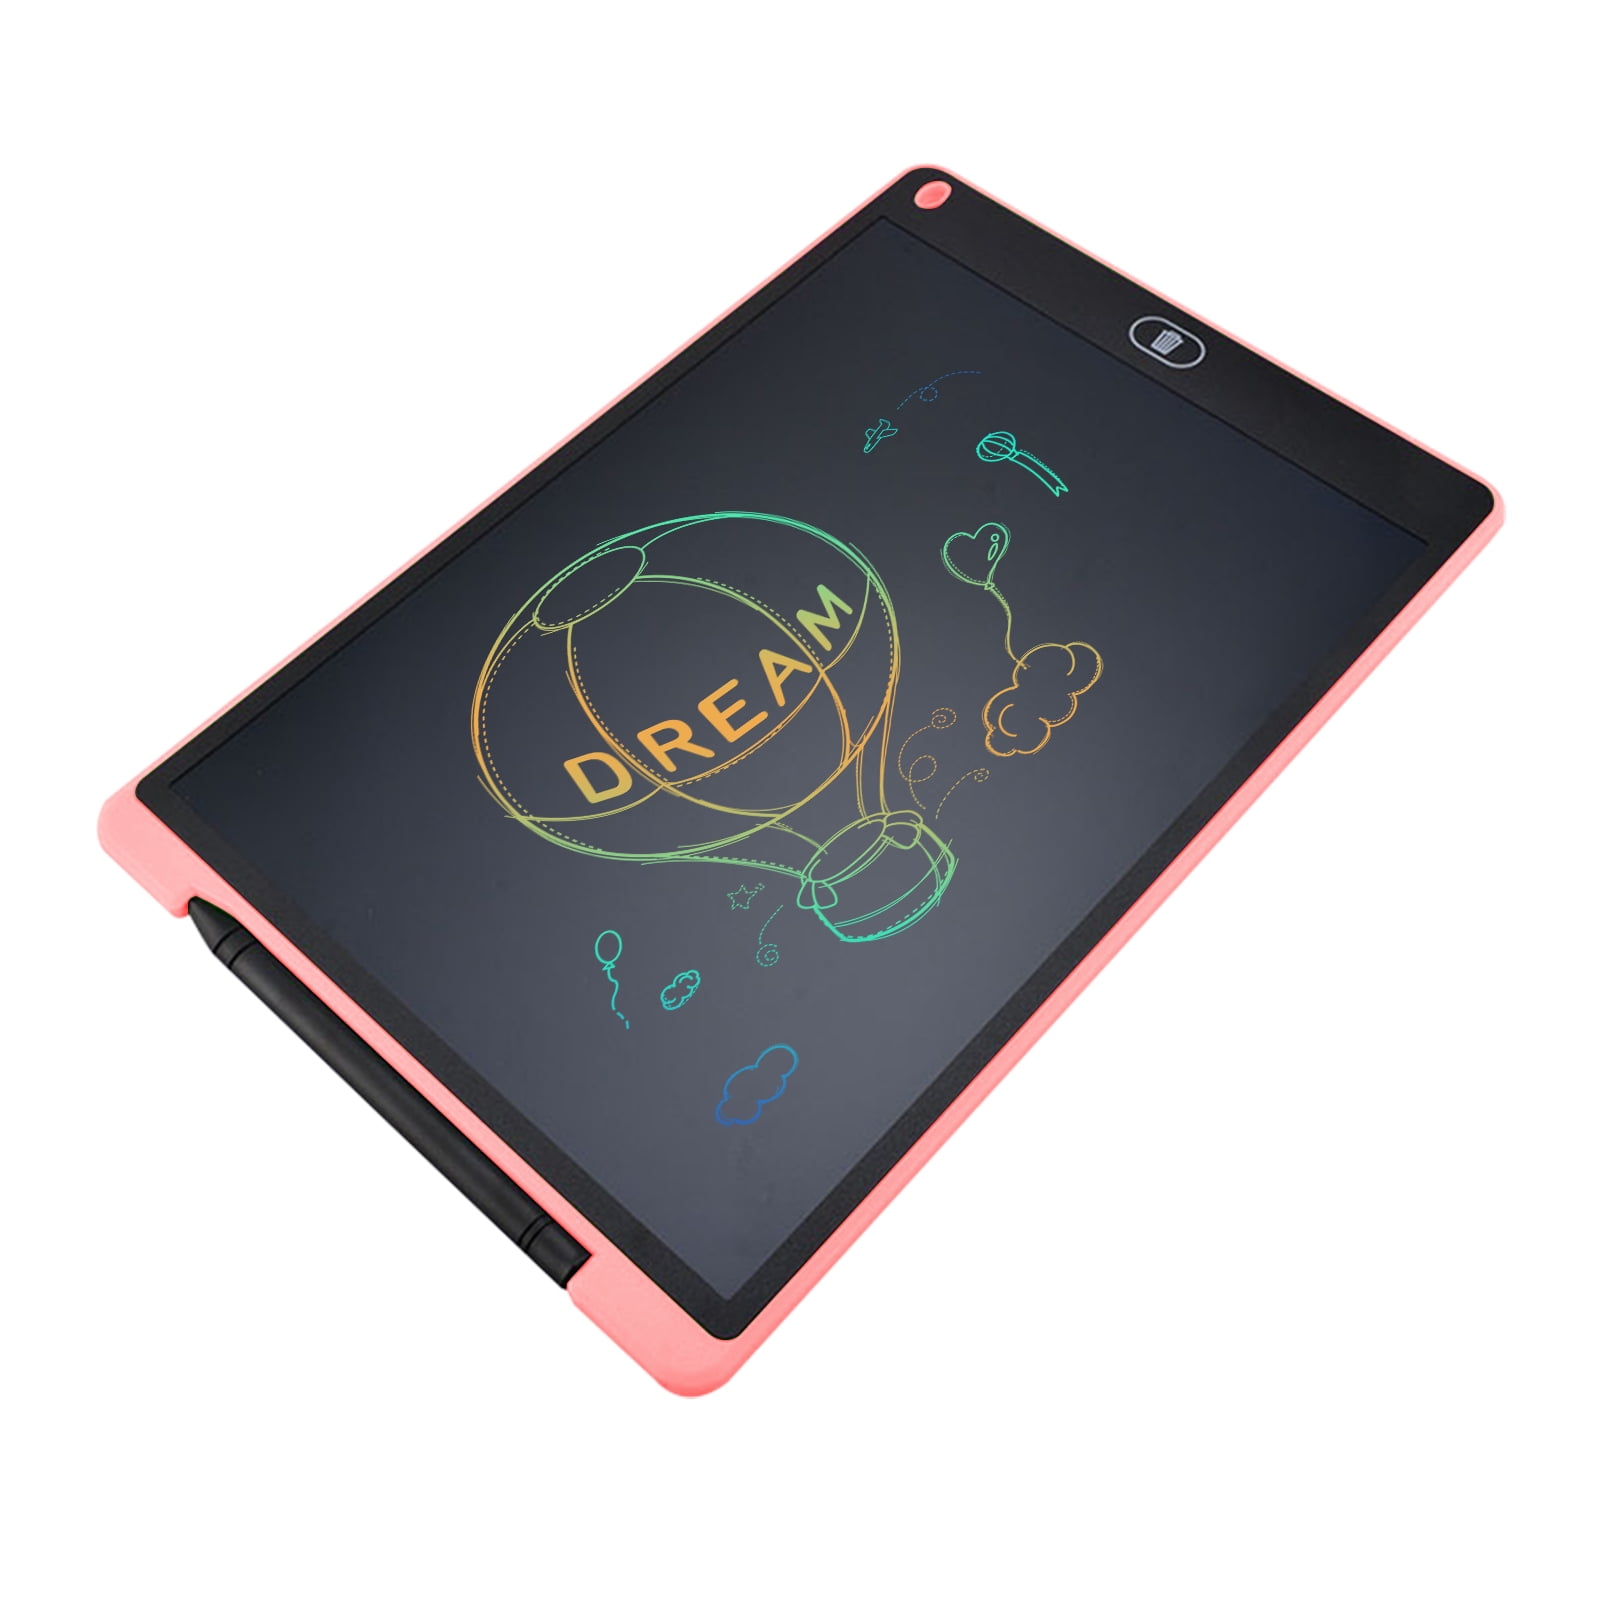 School,Office Electronic Graphics Tablet Portable 3 Pcs 8.5 Inch LCD Smart Electronic Tablet with A Key Lock Screen to Clear The Graffiti Painting Board for Kids and Adults for Home 